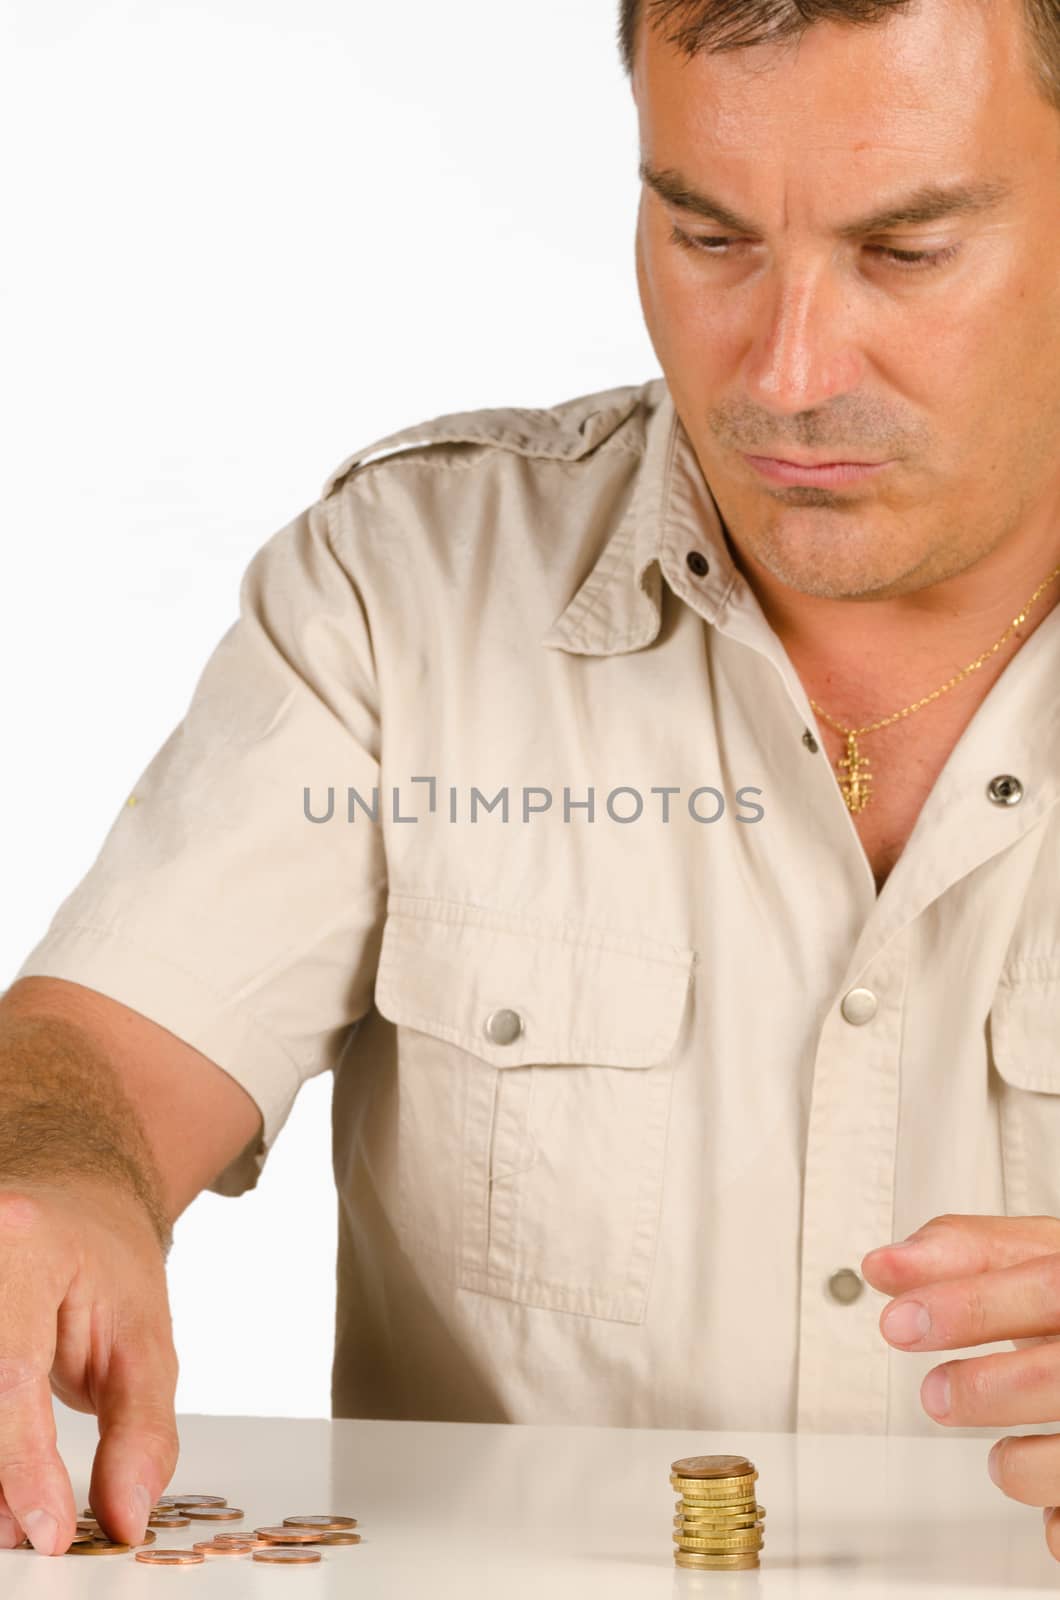 Guy counting some small change, a personal finance concept